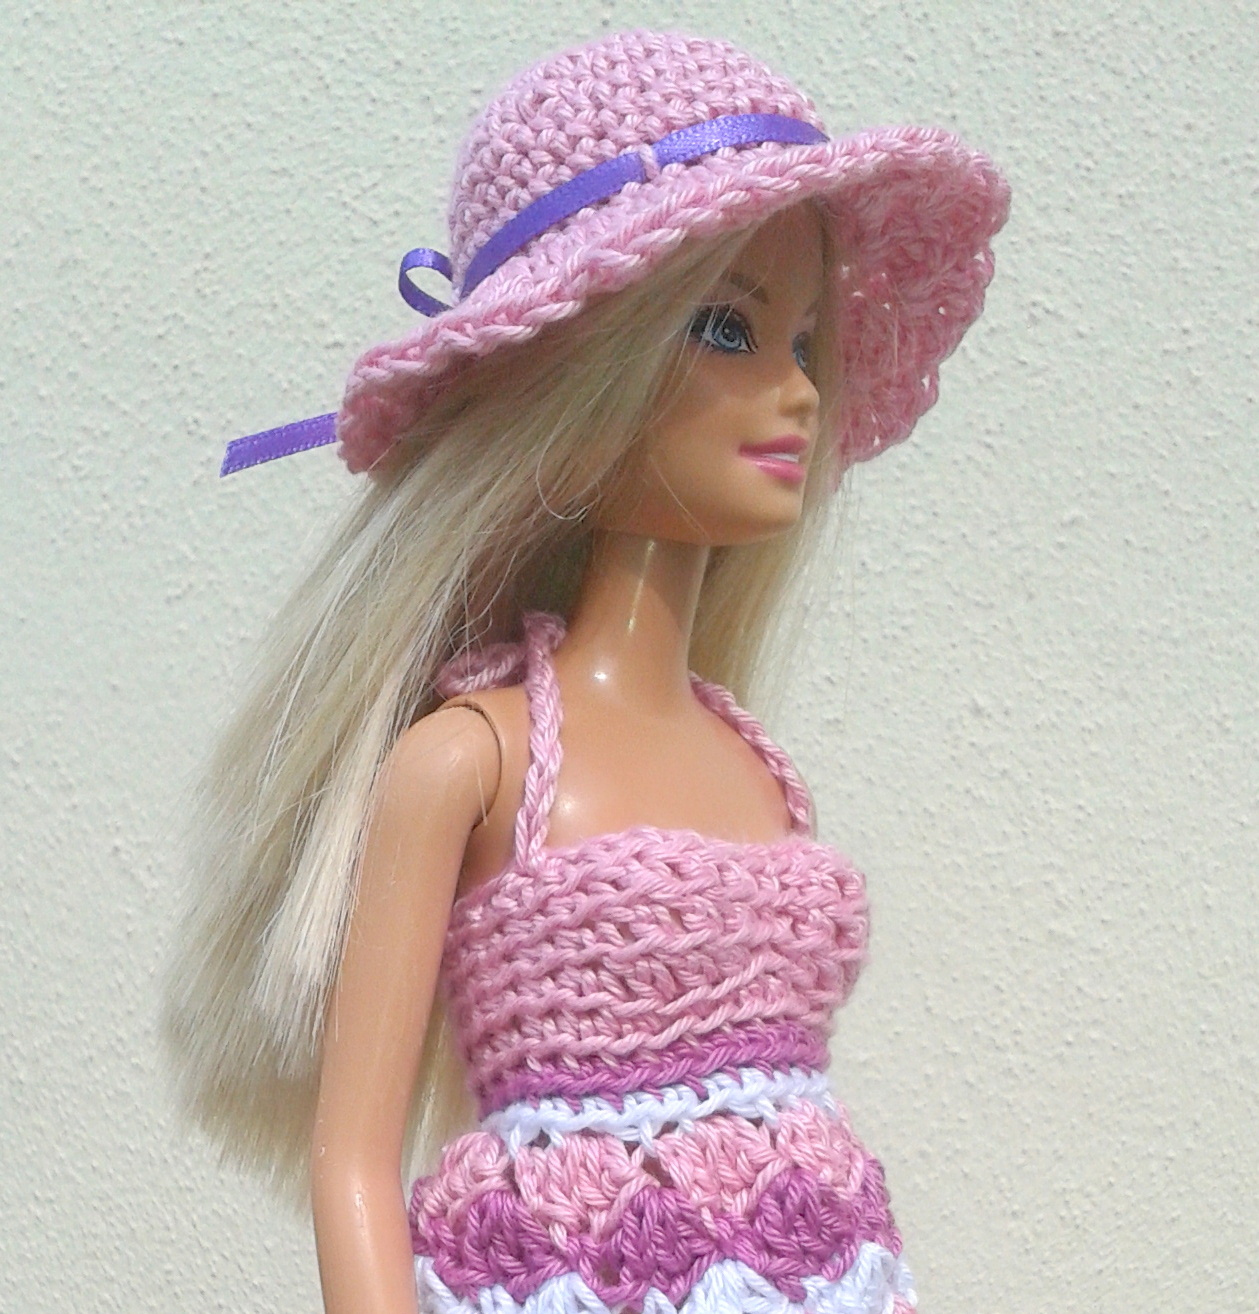 Linmary Knits: Barbie crochet summer dress and hat